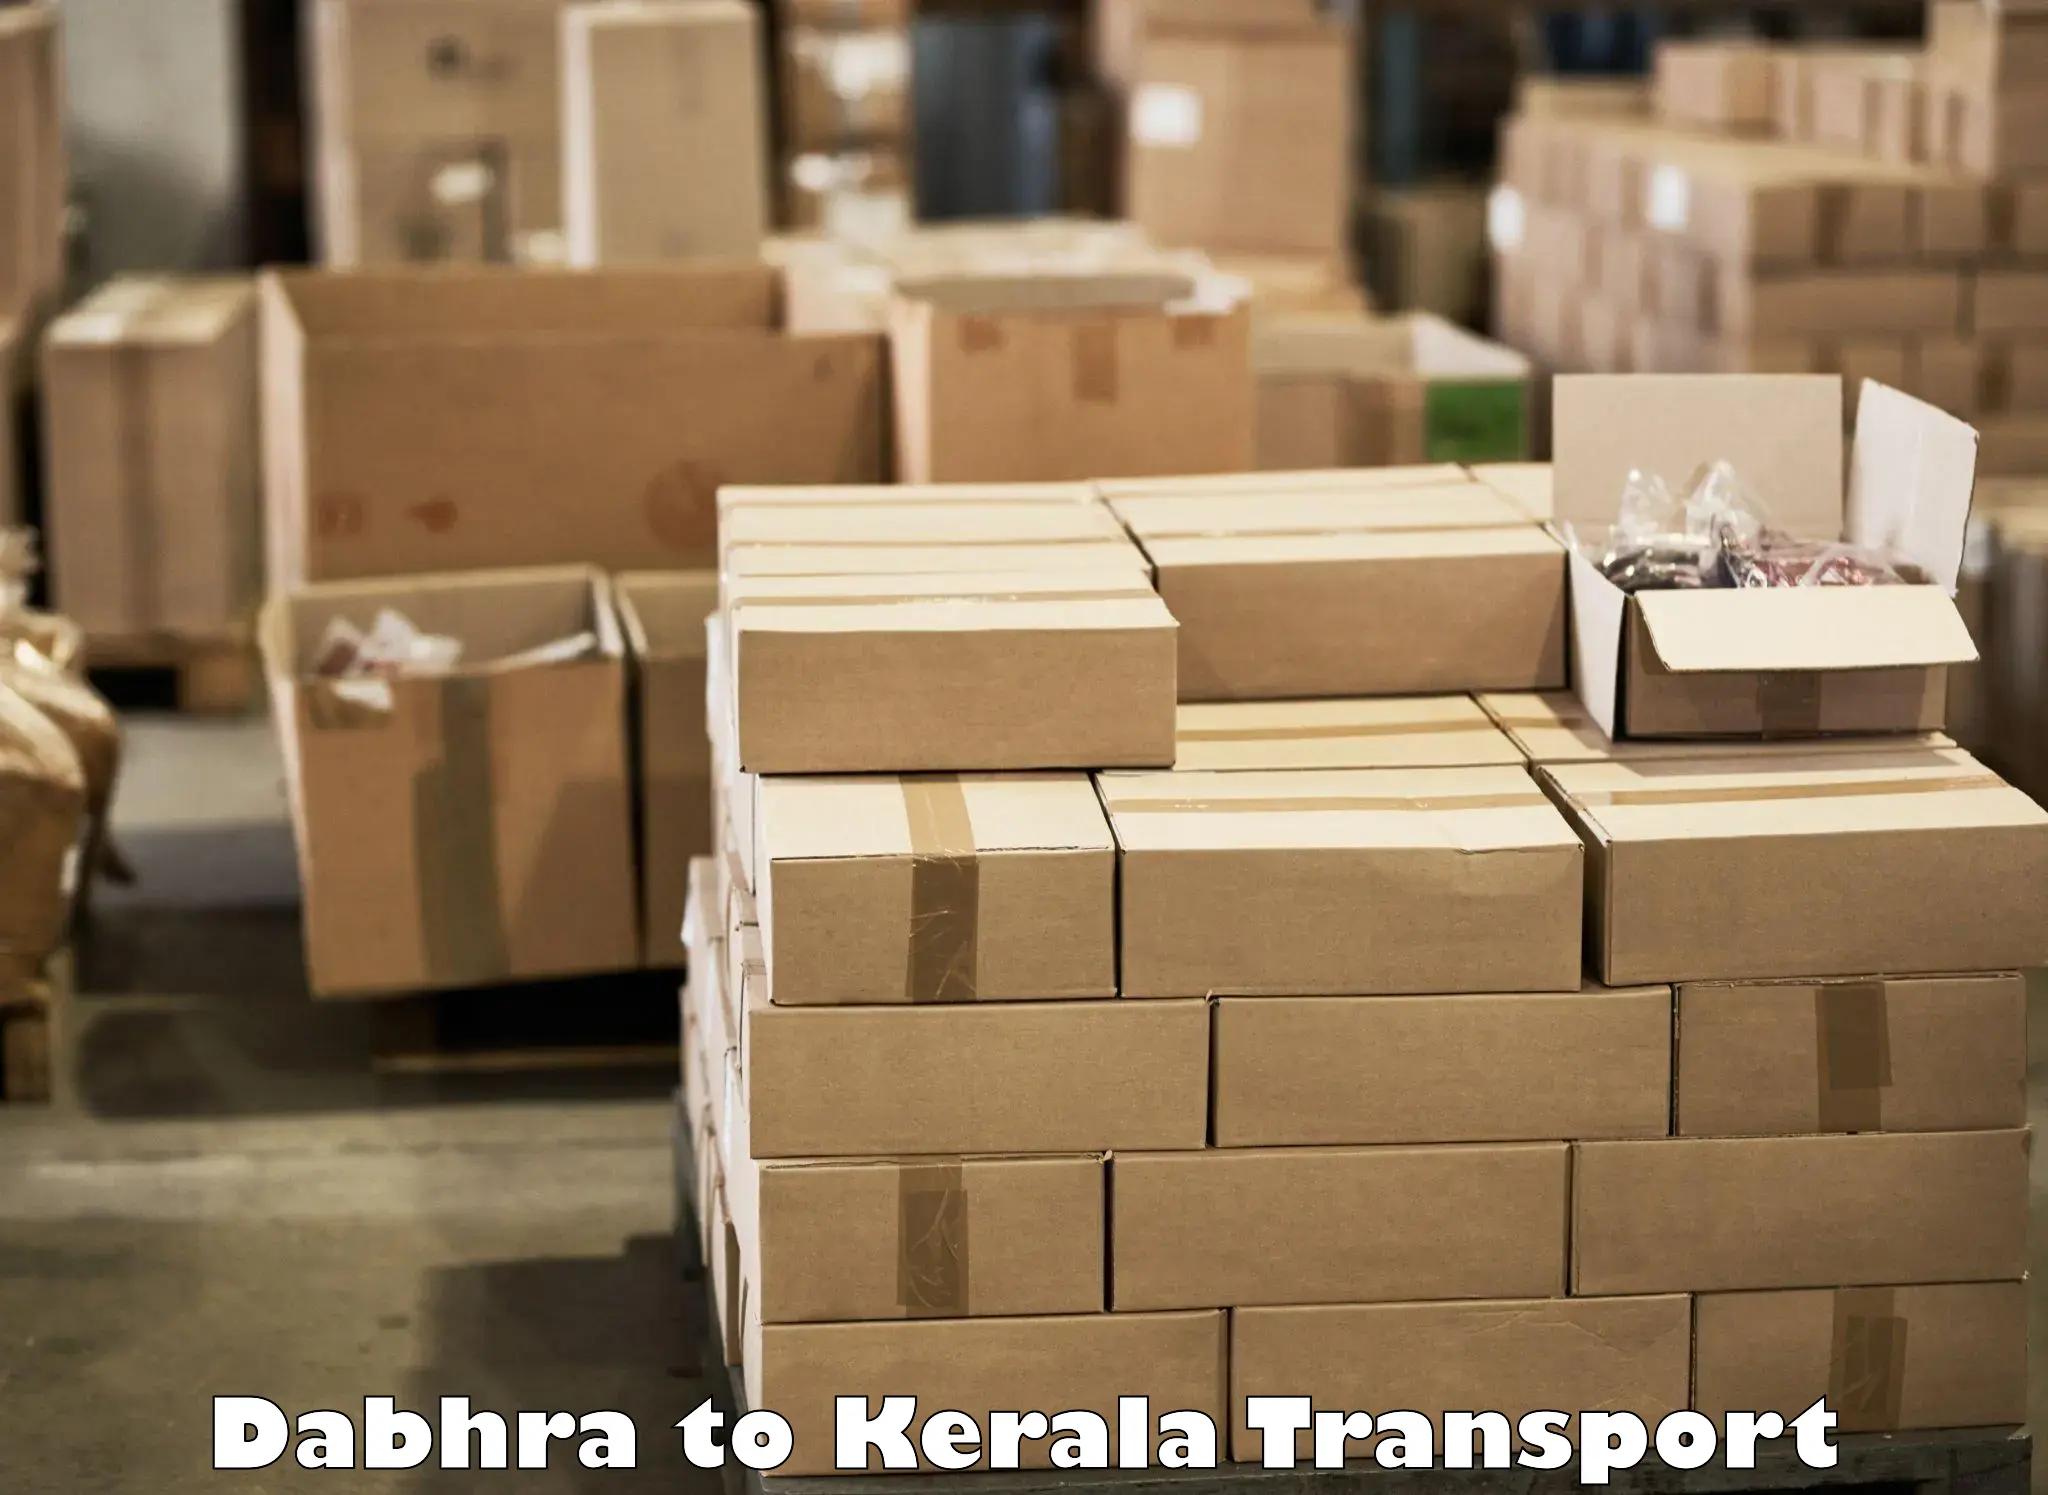 Container transport service Dabhra to Allepey